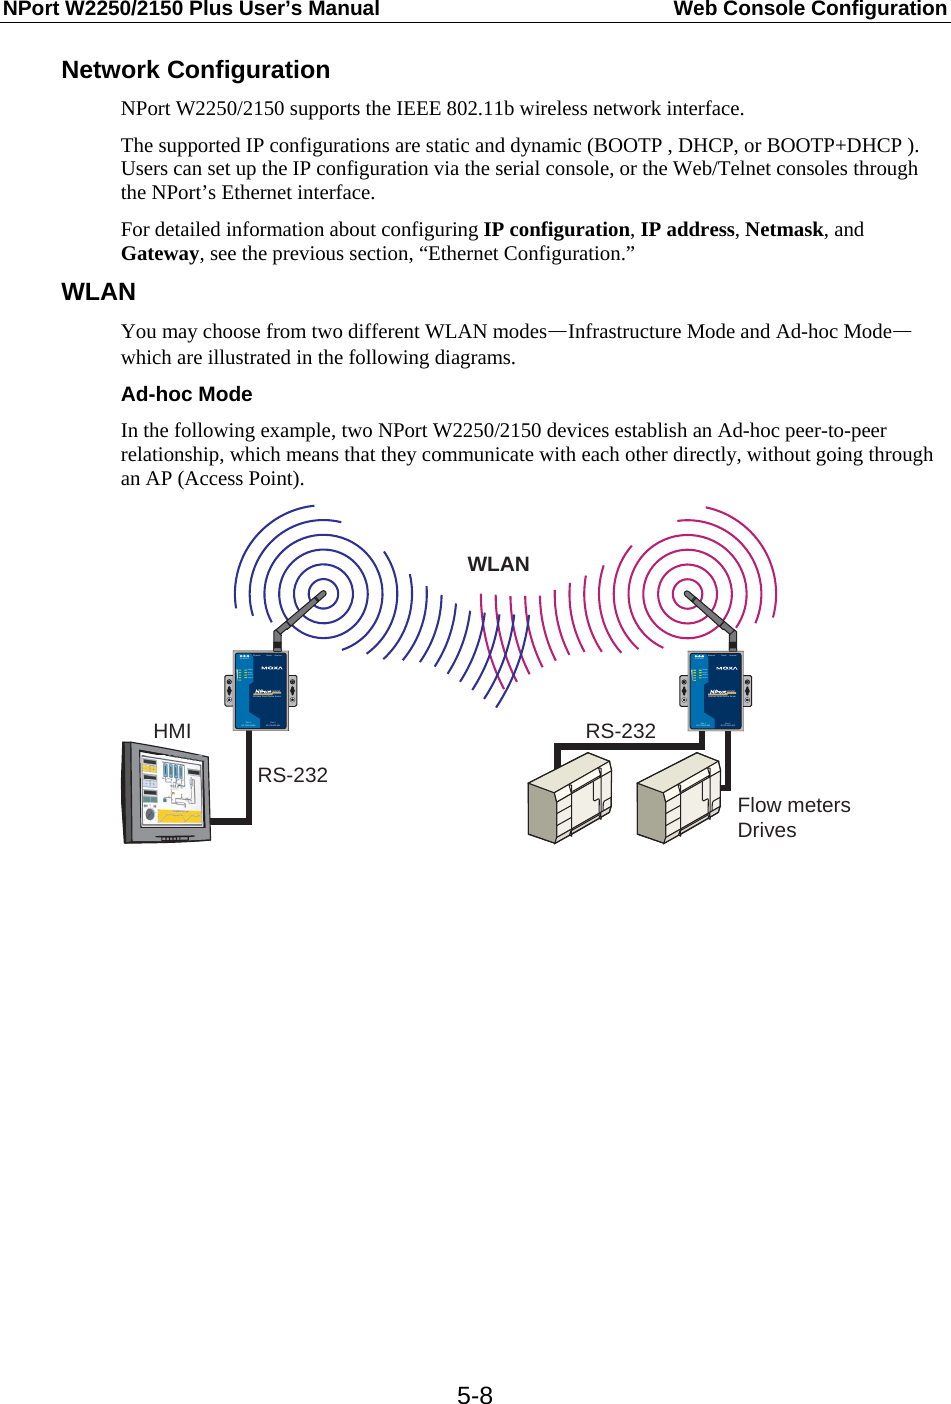 NPort W2250/2150 Plus User’s Manual  Web Console Configuration  5-8Network Configuration NPort W2250/2150 supports the IEEE 802.11b wireless network interface. The supported IP configurations are static and dynamic (BOOTP , DHCP, or BOOTP+DHCP ). Users can set up the IP configuration via the serial console, or the Web/Telnet consoles through the NPort’s Ethernet interface. For detailed information about configuring IP configuration, IP address, Netmask, and Gateway, see the previous section, “Ethernet Configuration.” WLAN You may choose from two different WLAN modes—Infrastructure Mode and Ad-hoc Mode—which are illustrated in the following diagrams. Ad-hoc Mode In the following example, two NPort W2250/2150 devices establish an Ad-hoc peer-to-peer relationship, which means that they communicate with each other directly, without going through an AP (Access Point). WLANRS-232HMIRS-232Flow metersDrivesAntennaPort 1 RS-232/422/485Port 2 RS-232/422-485 Wireless Serial Device ServerW2250ResetEthernet12-48 VDCReadyWLANSerial 1Serial 2AntennaPort 1 RS-232/422/485Port 2 RS-232/422-485 Wireless Serial Device ServerW2250ResetEthernet12-48 VDCReadyWLANSerial 1Serial 2              